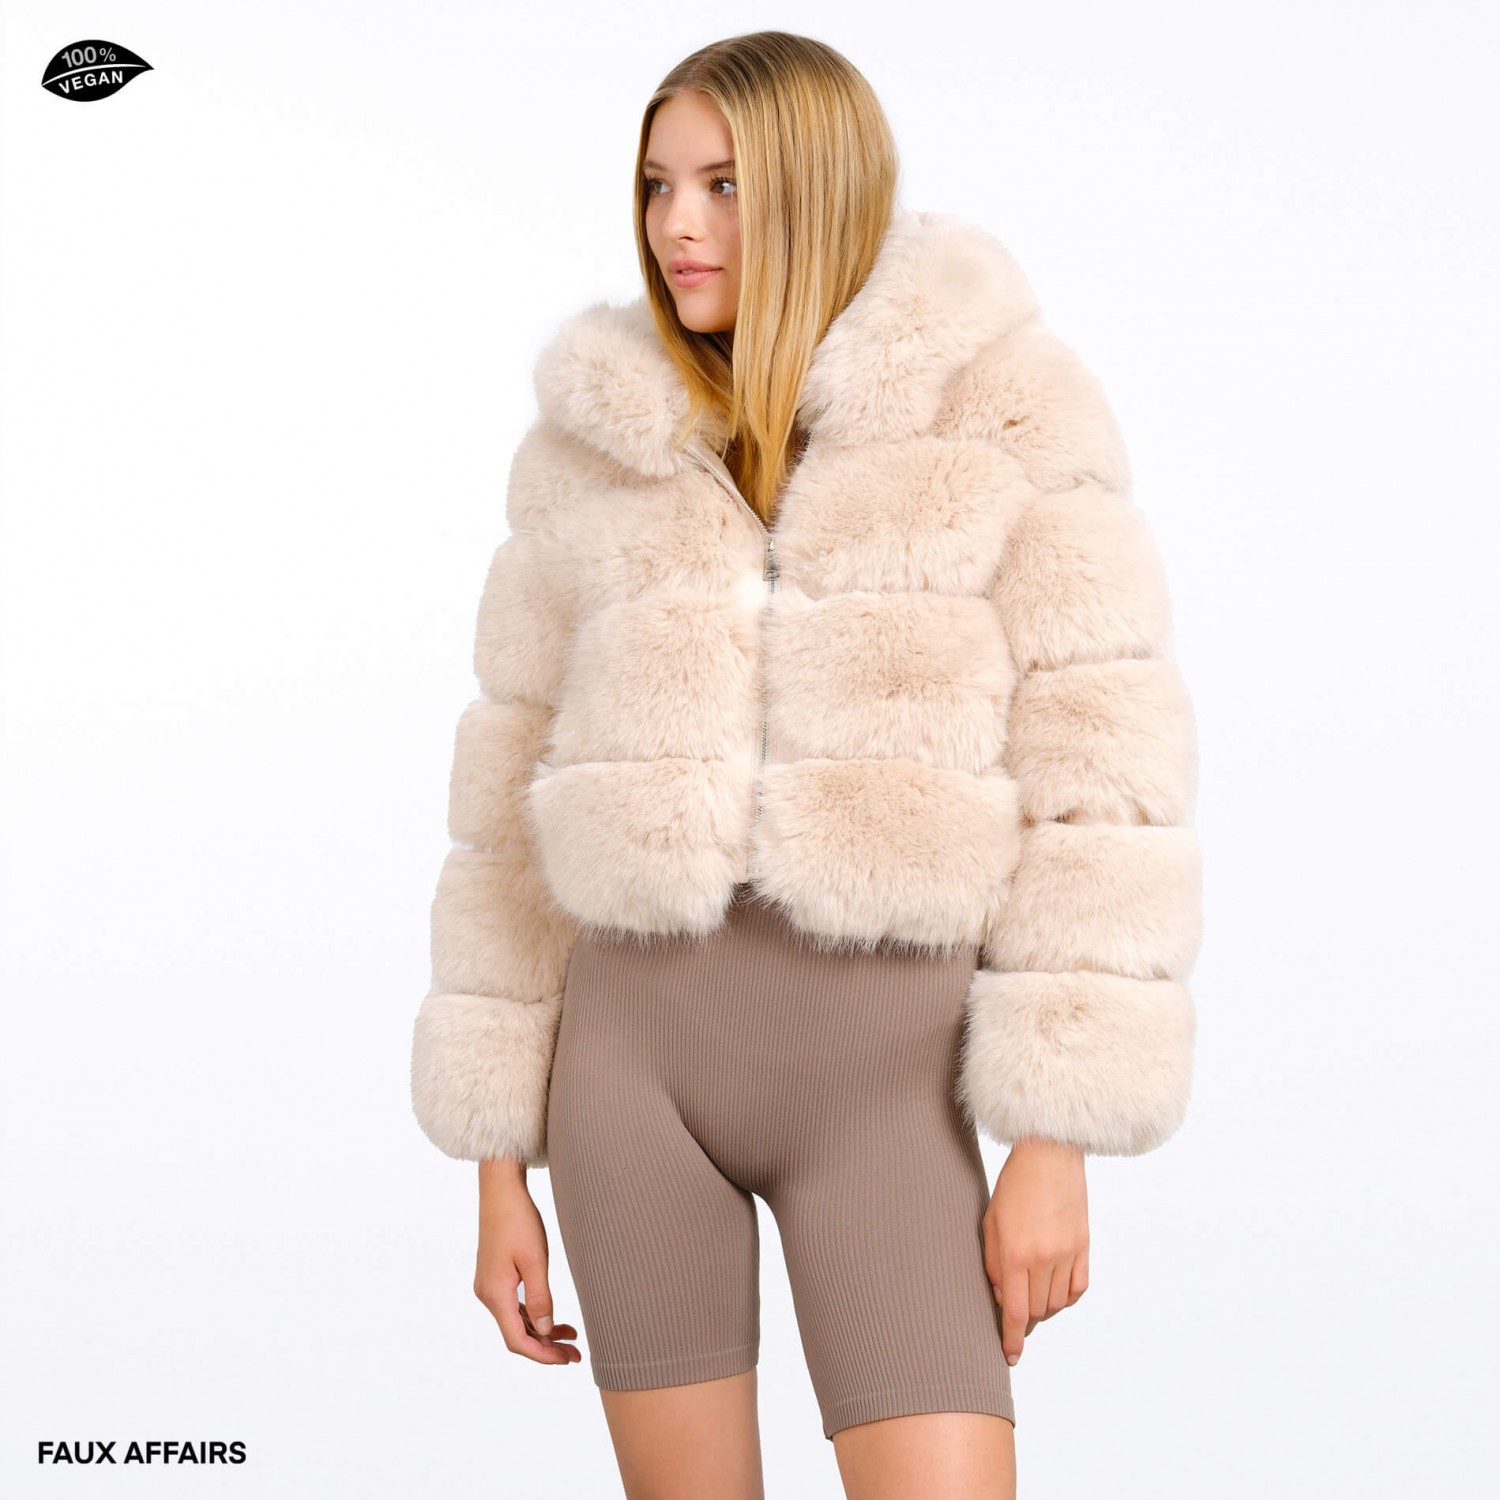 Faux Fur Jacket with hood